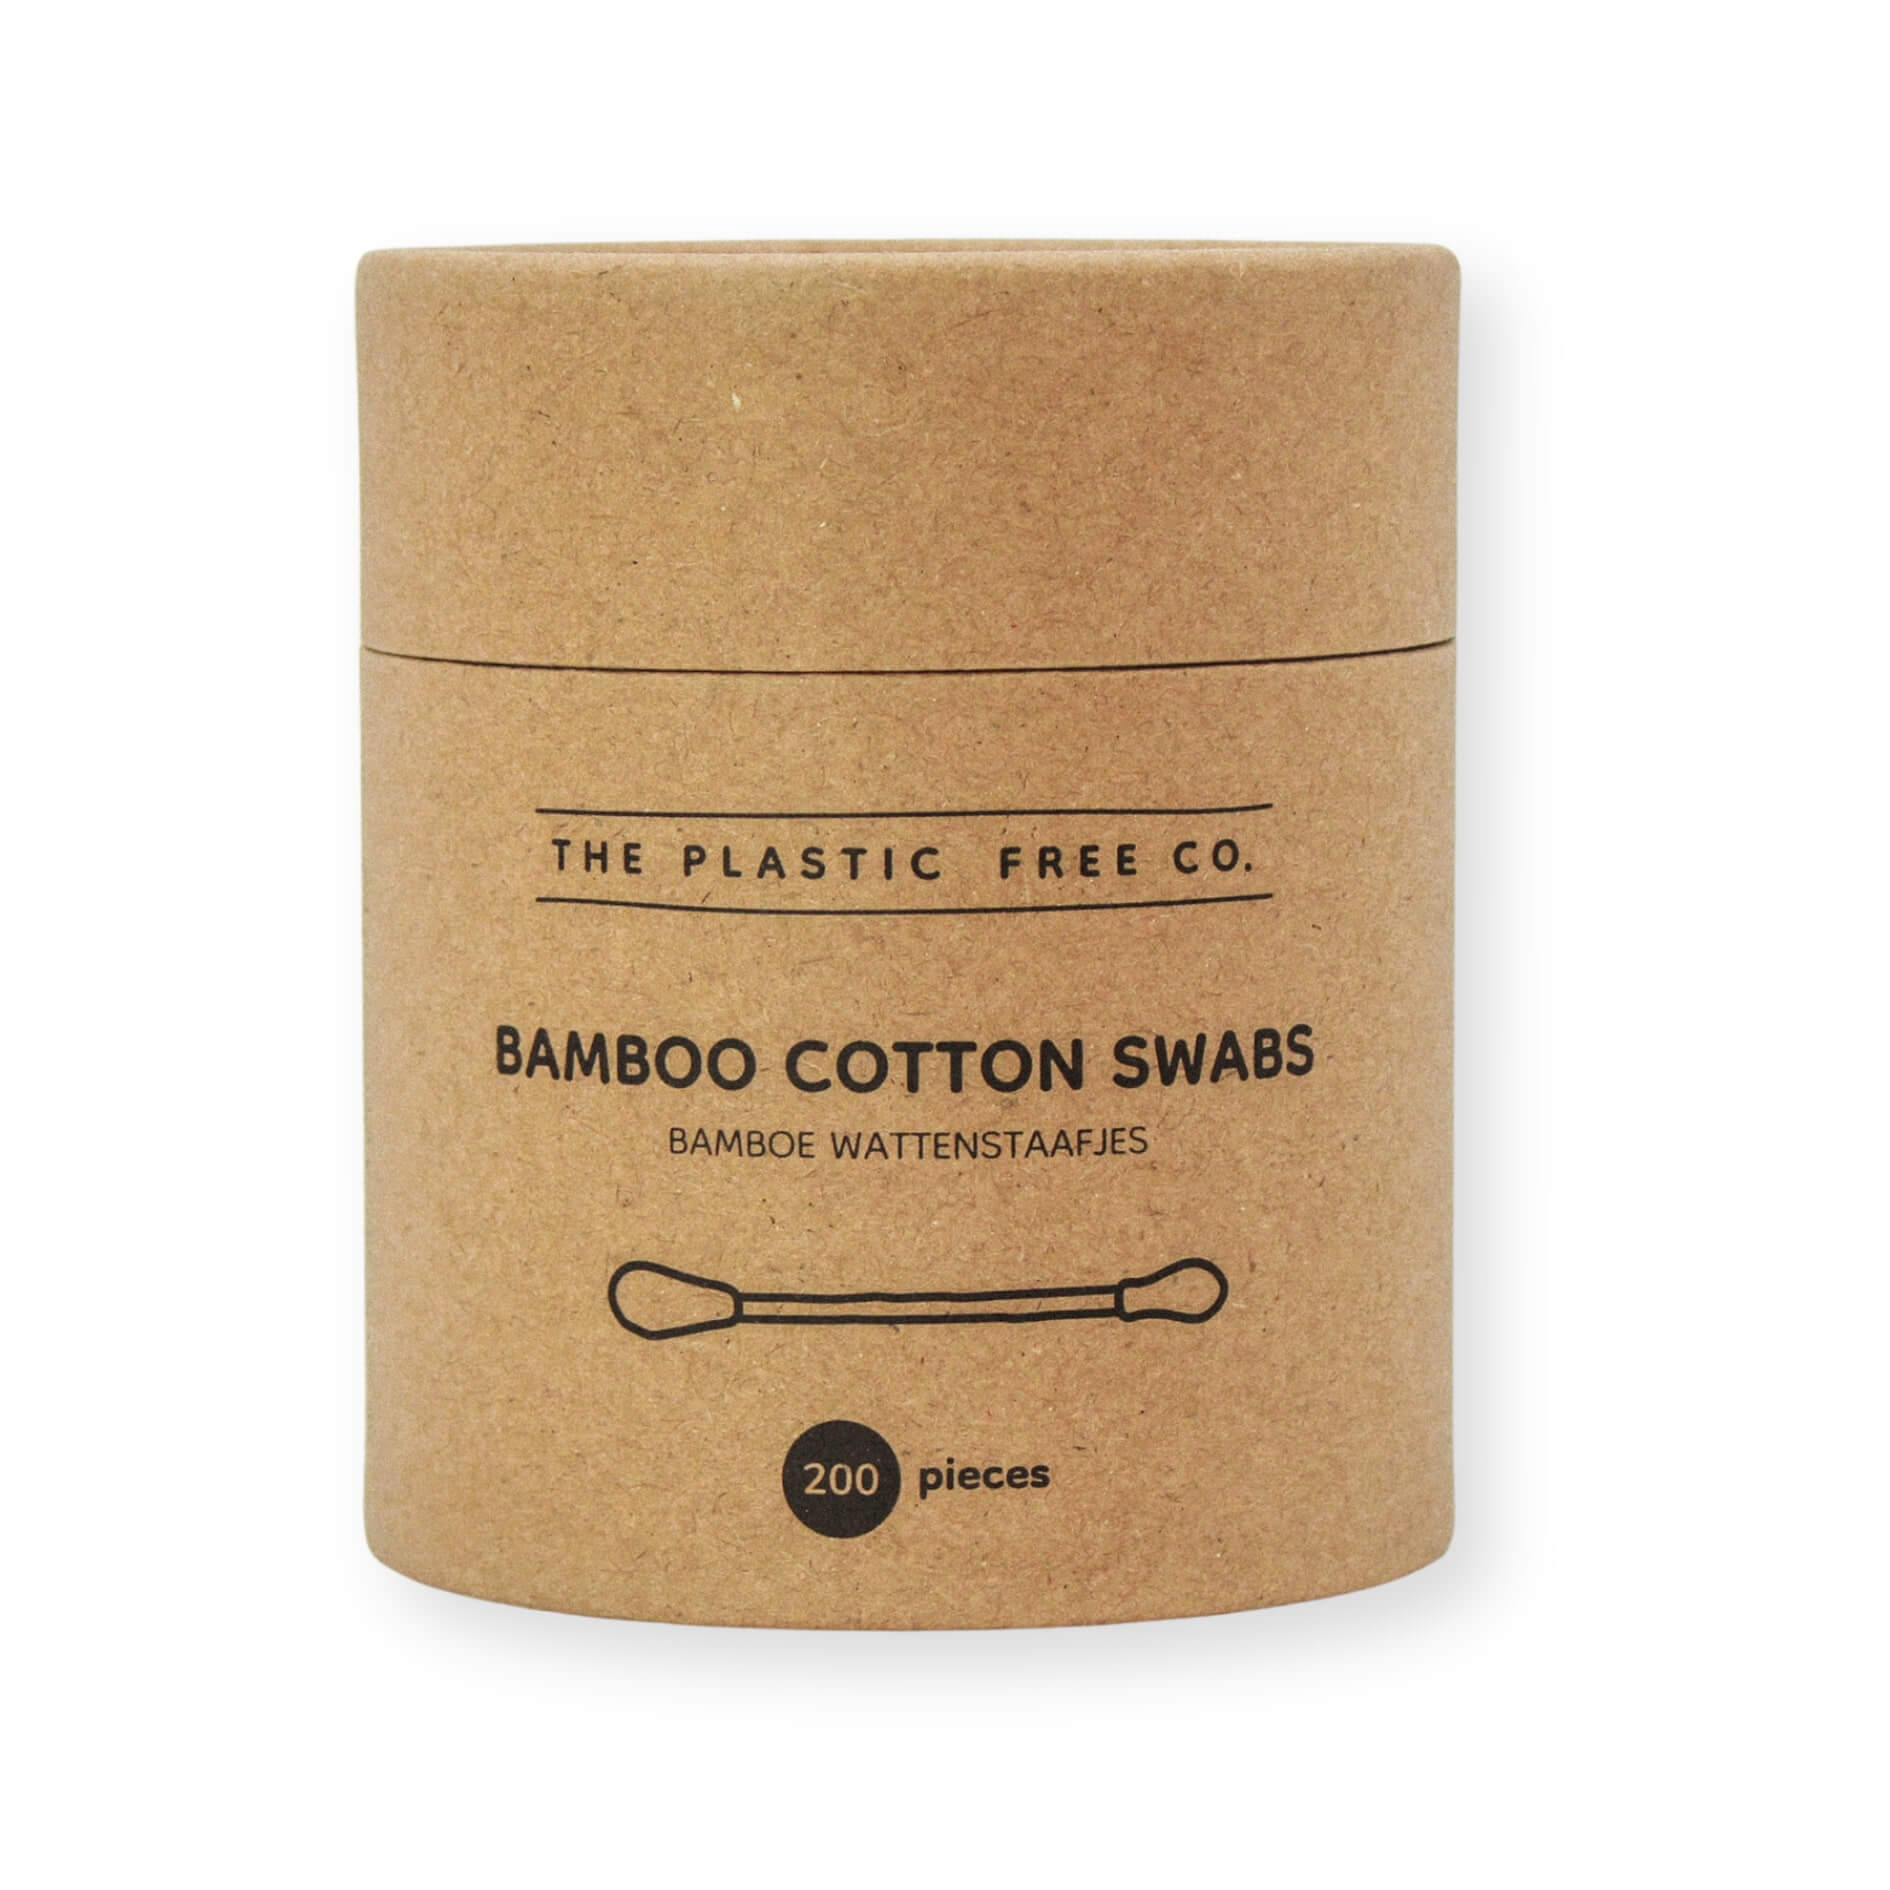 Bamboo Cotton Swabs - The Plastic Free Co.